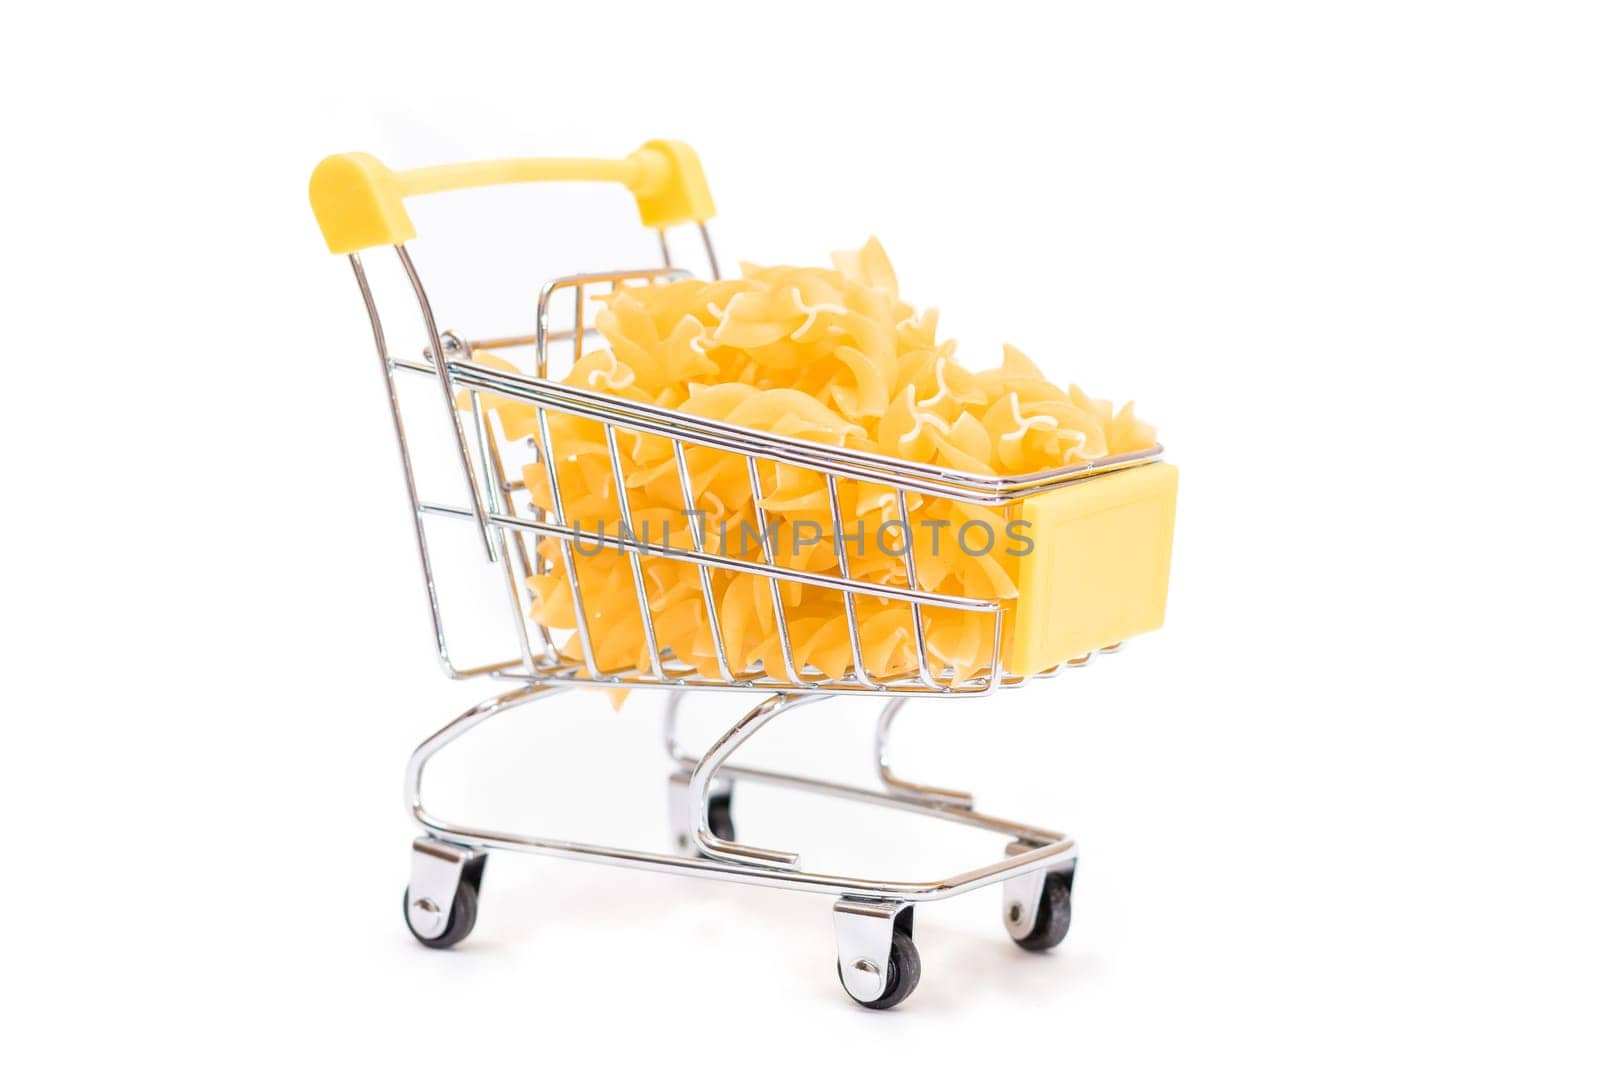 Uncooked Fusilli Pasta in Small Shopping Cart Isolated on White Background. A Crisis: Buying Cheap Food. Classic Dry Spiral Macaroni. Italian Culture and Cuisine. Raw Pasta - Isolation